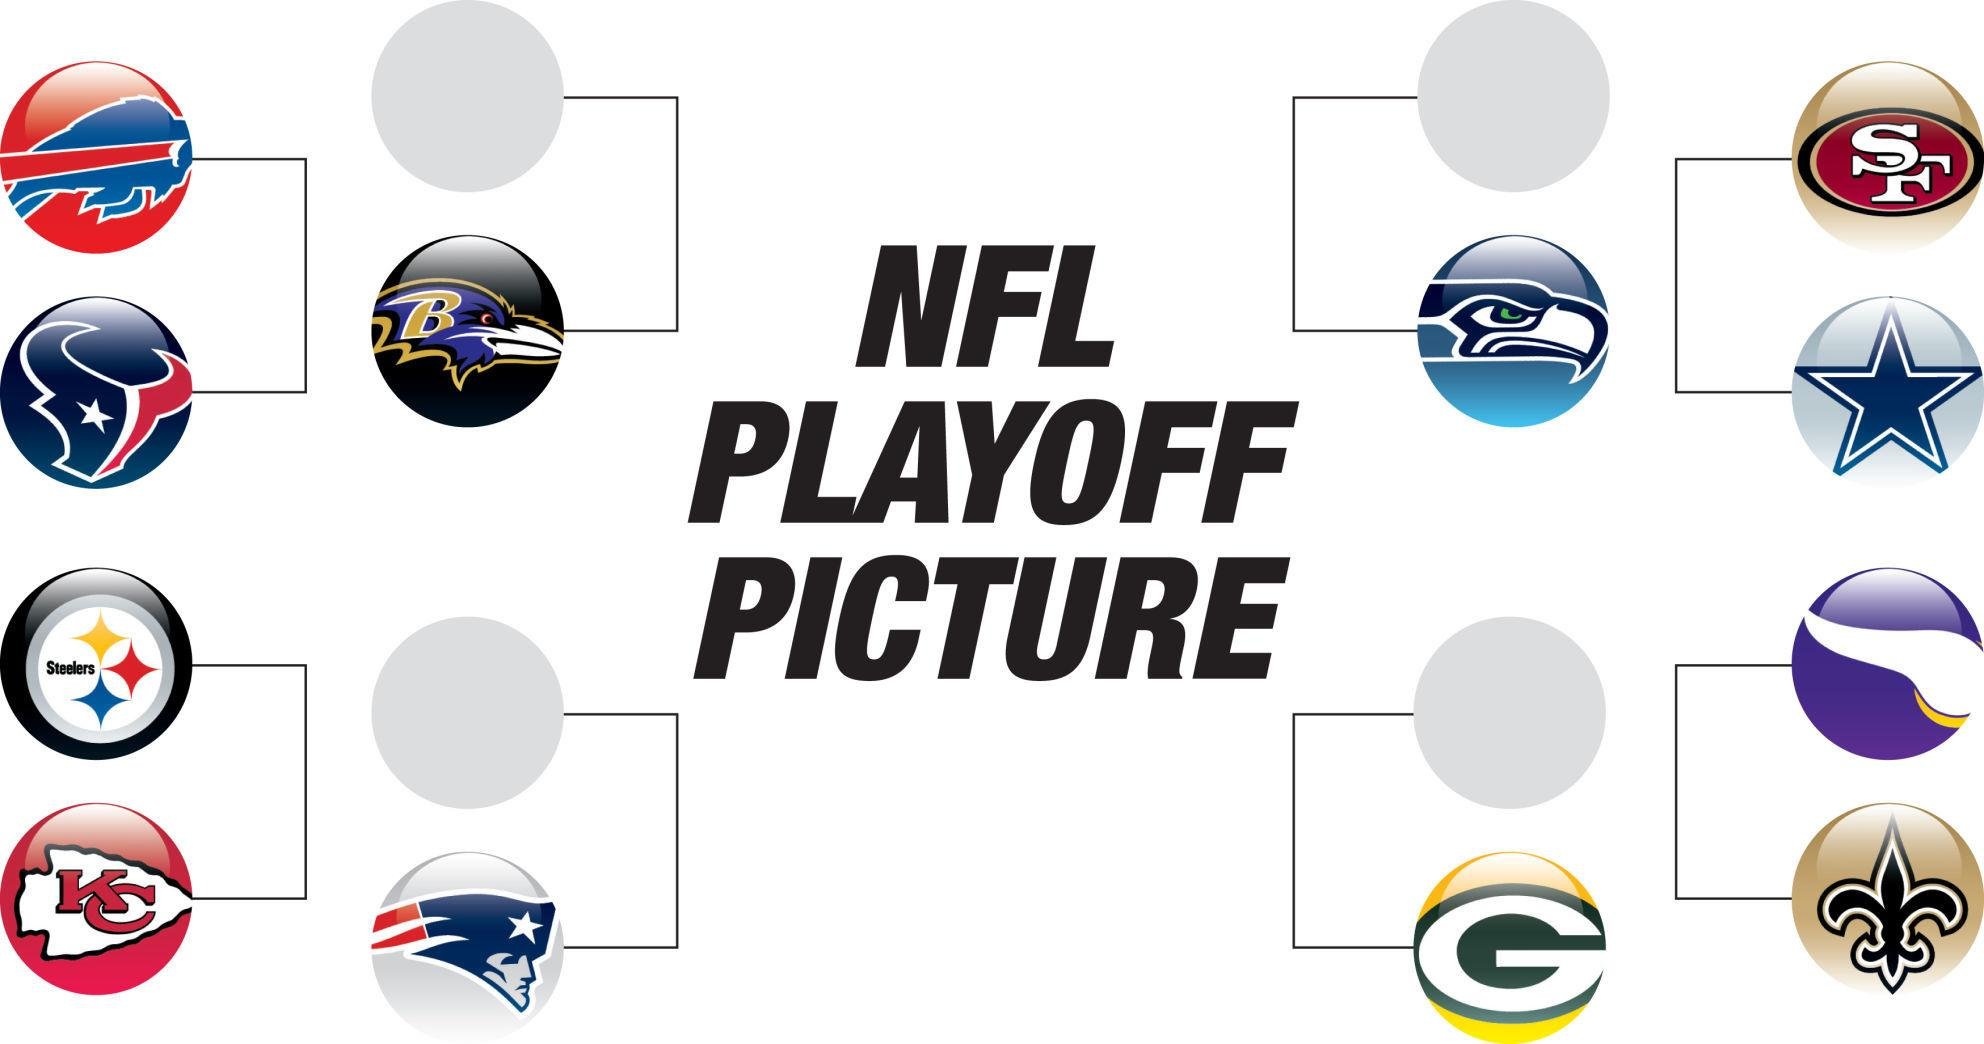 With 2 weeks remaining, the NFL playoff picture and projected playoff